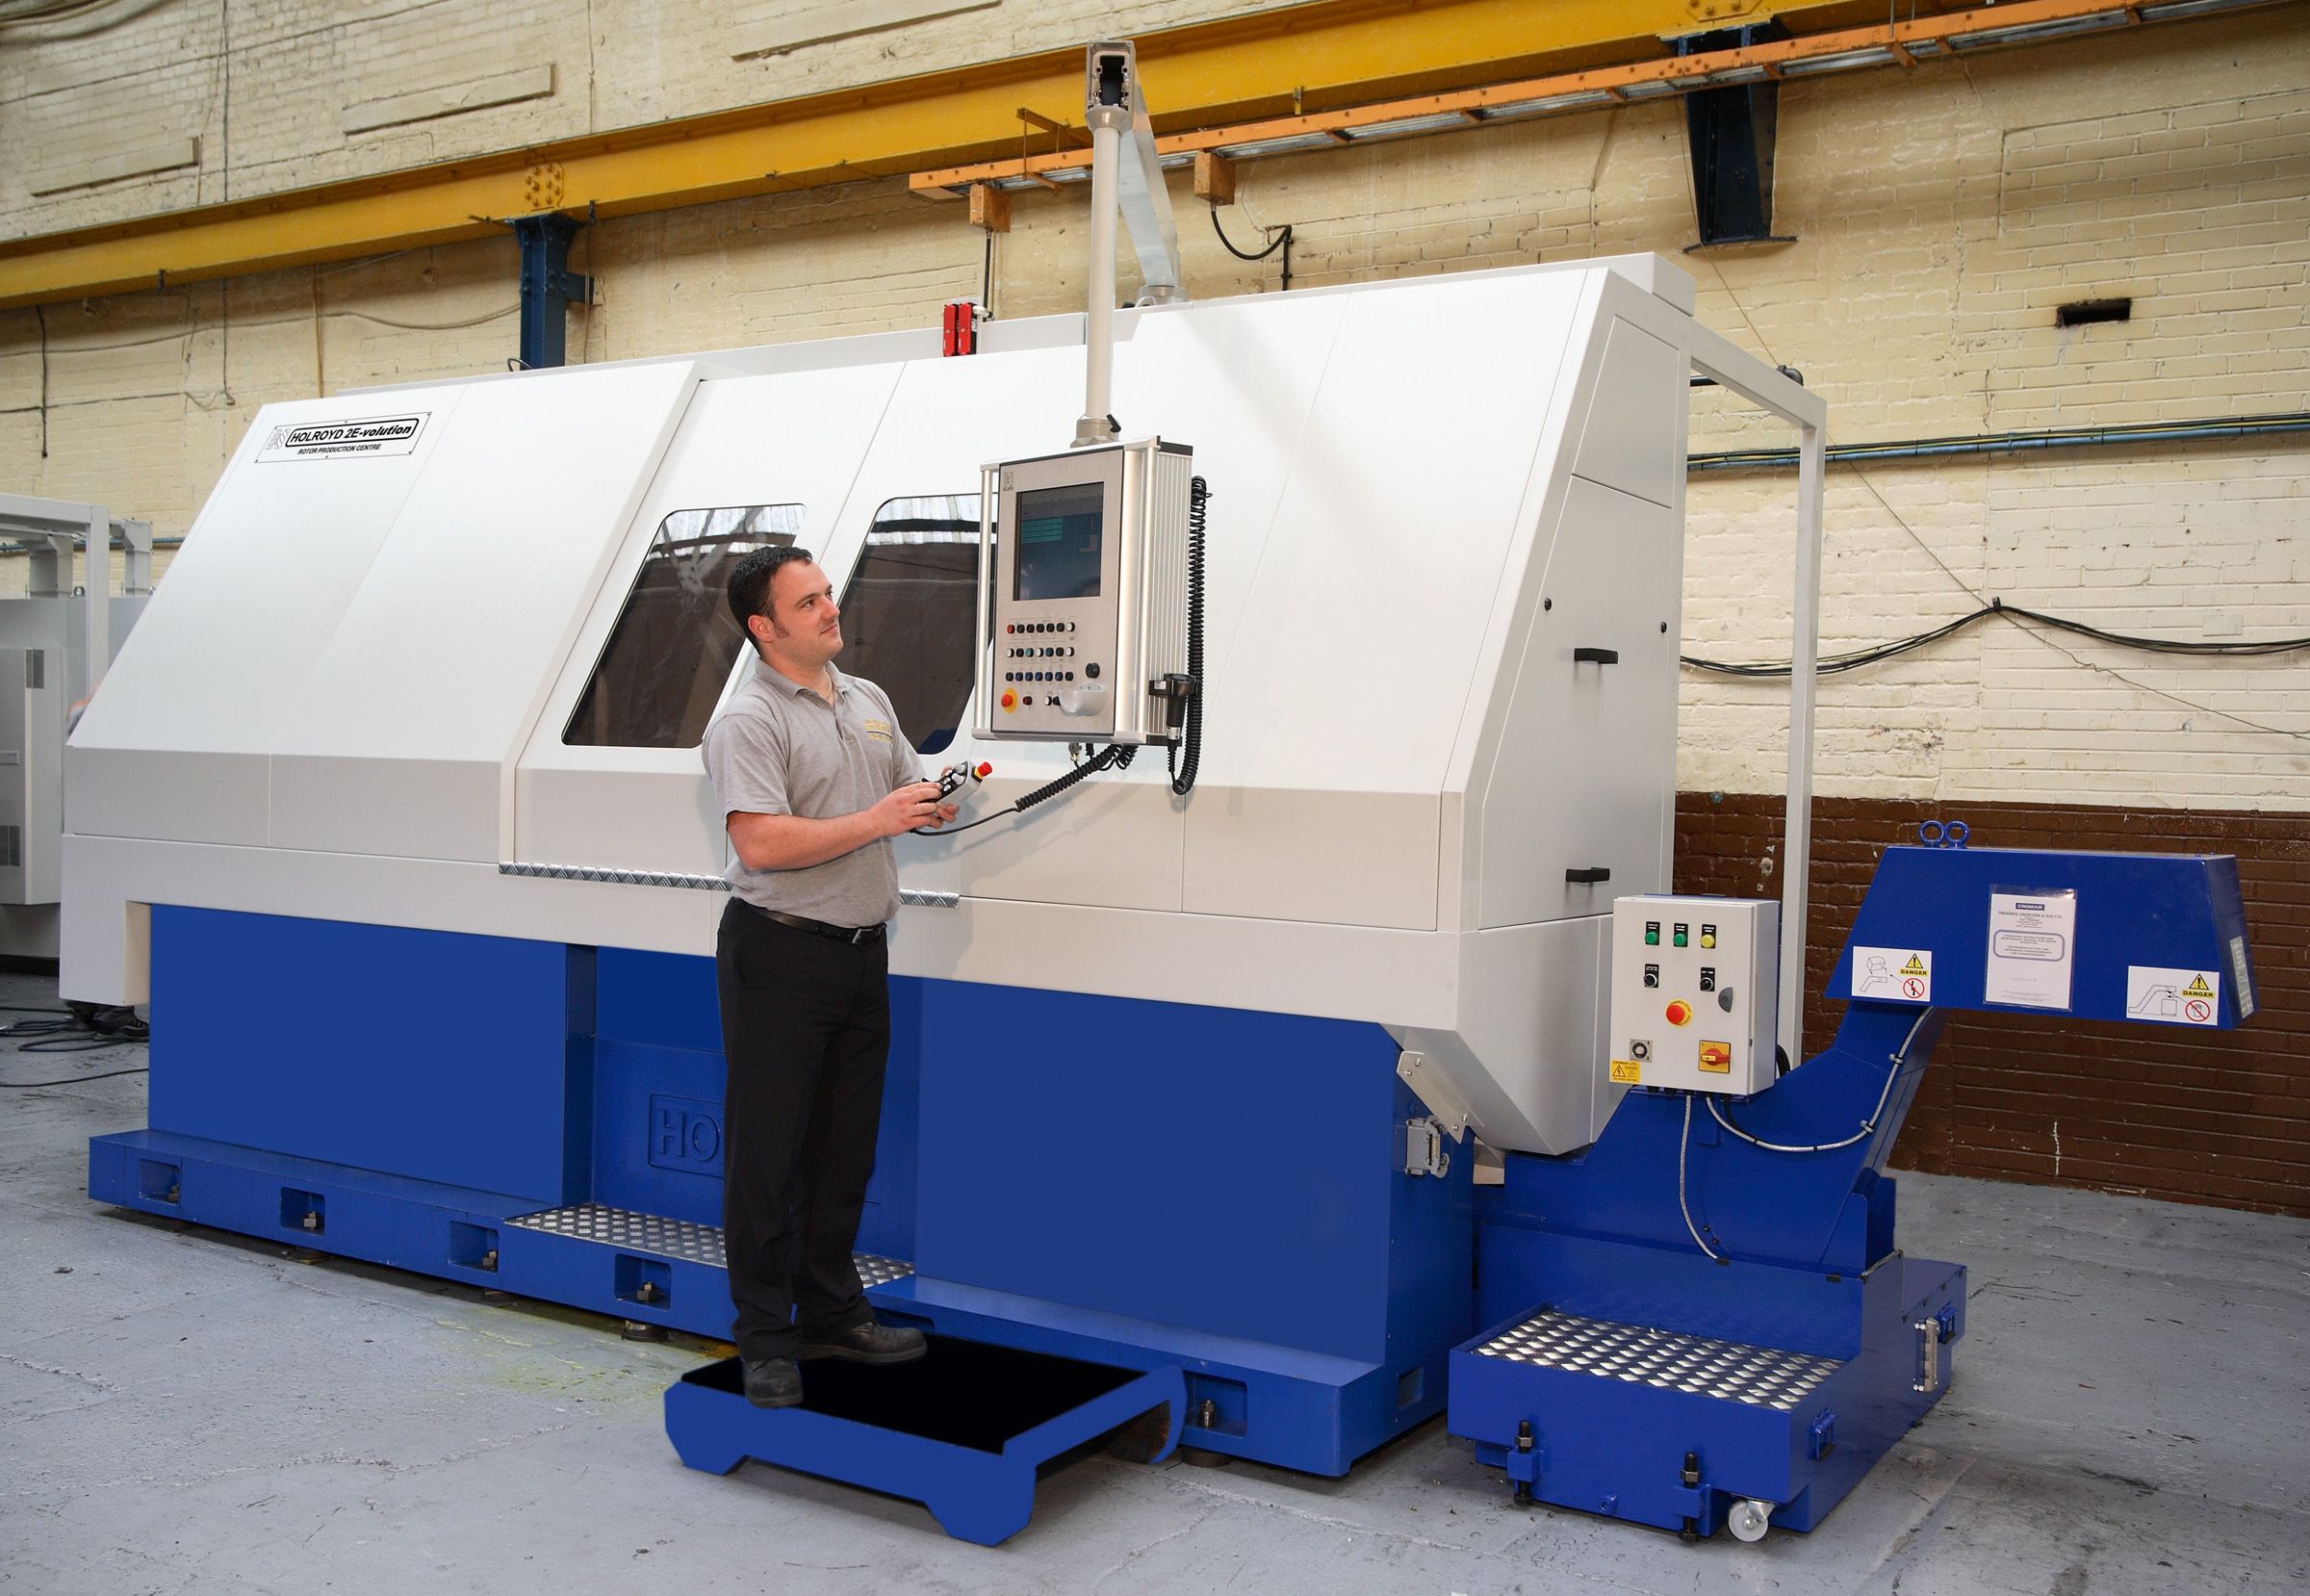 Full OEM rebuild to bring advanced performance and Siemens’ control to 1990s Holroyd rotor miller